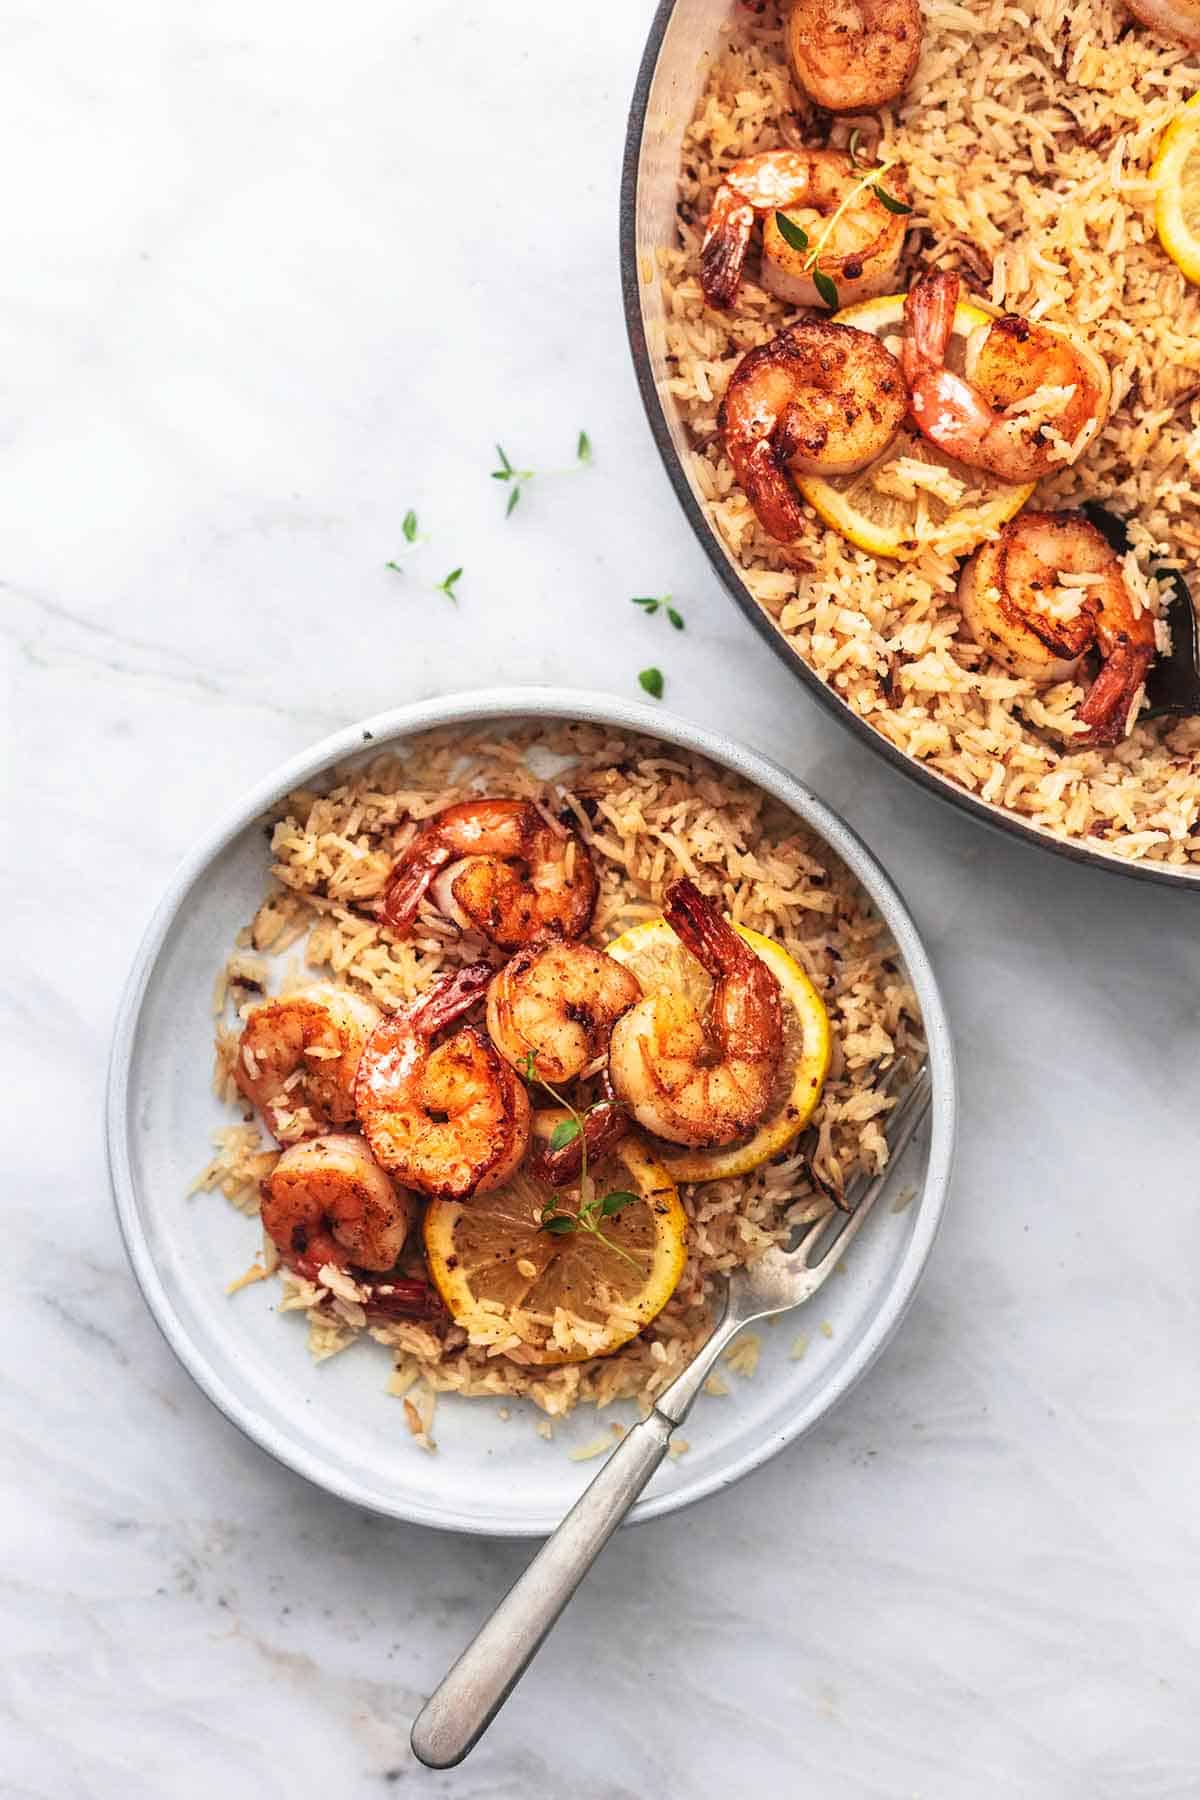 top view of lemon herb shrimp and rice skillet with lemon slices on a plate with a fork with more shrimp and rice in a skillet on the side.